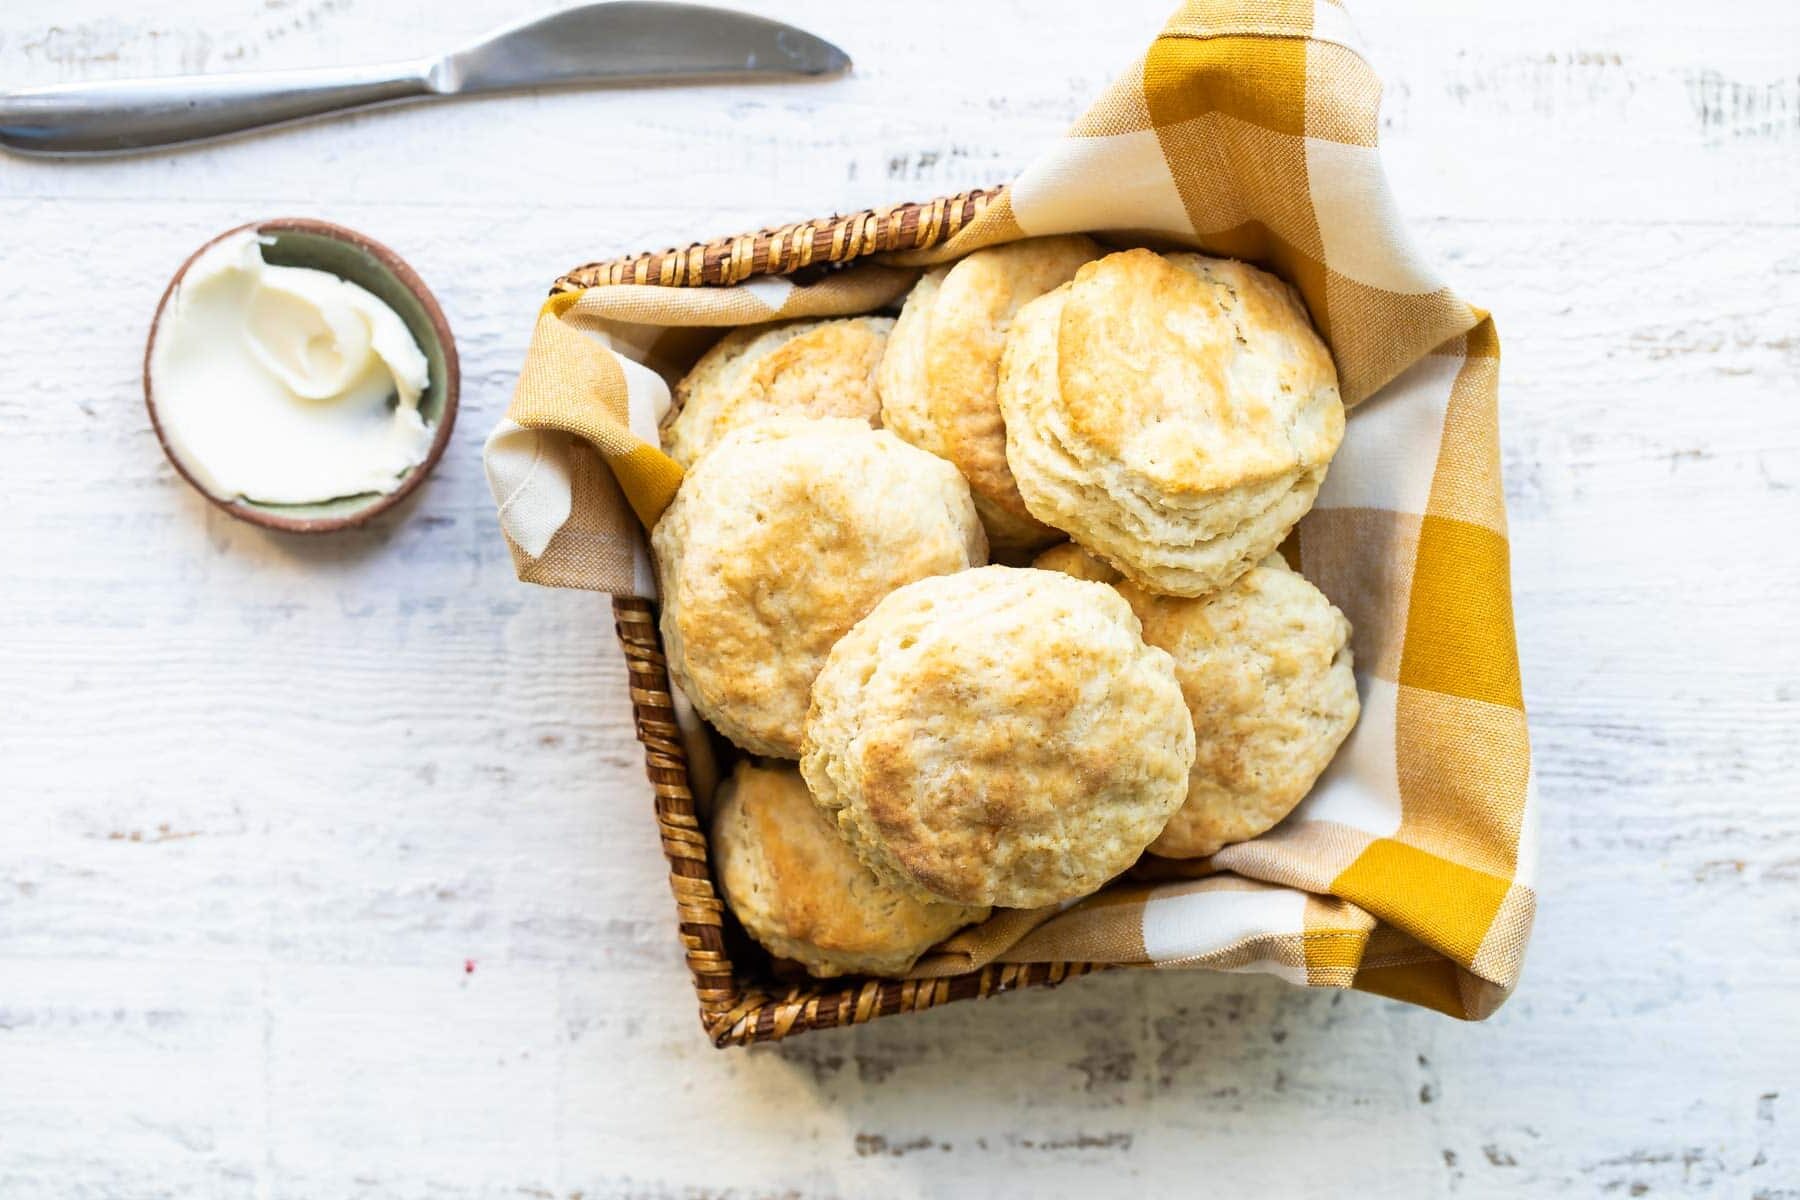 A basket of homemade biscuits.